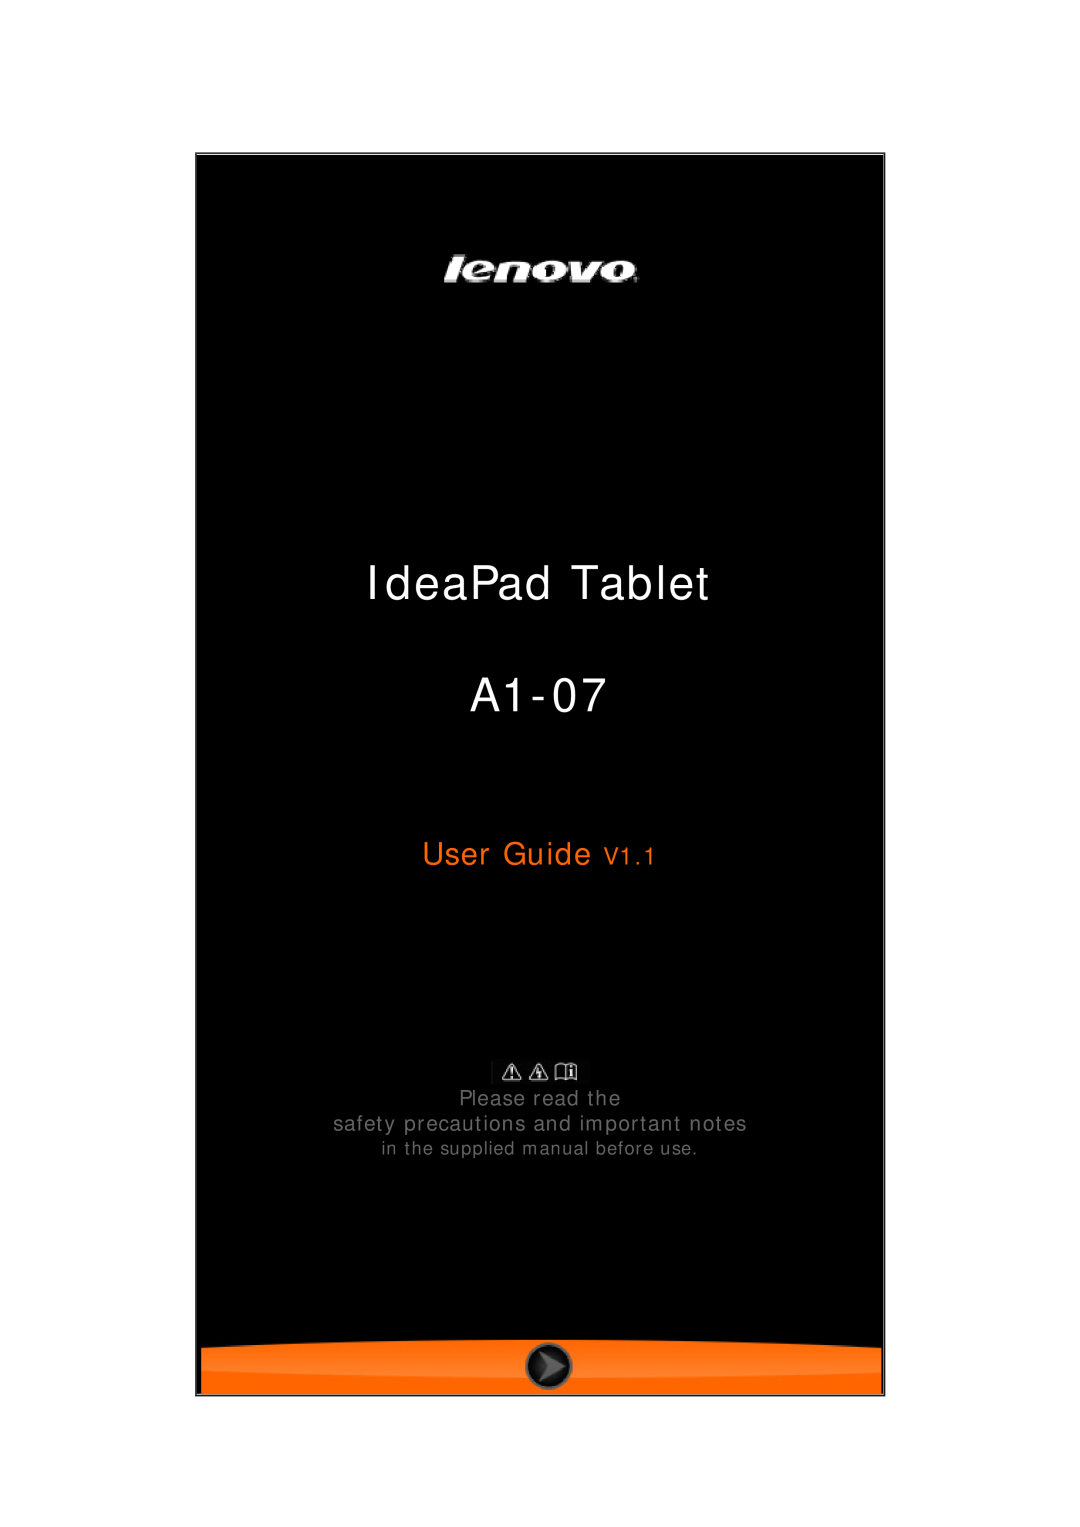 Lenovo 22282EU manual IdeaPad Tablet A1-07, User Guide, Please read the safety precautions and important notes 